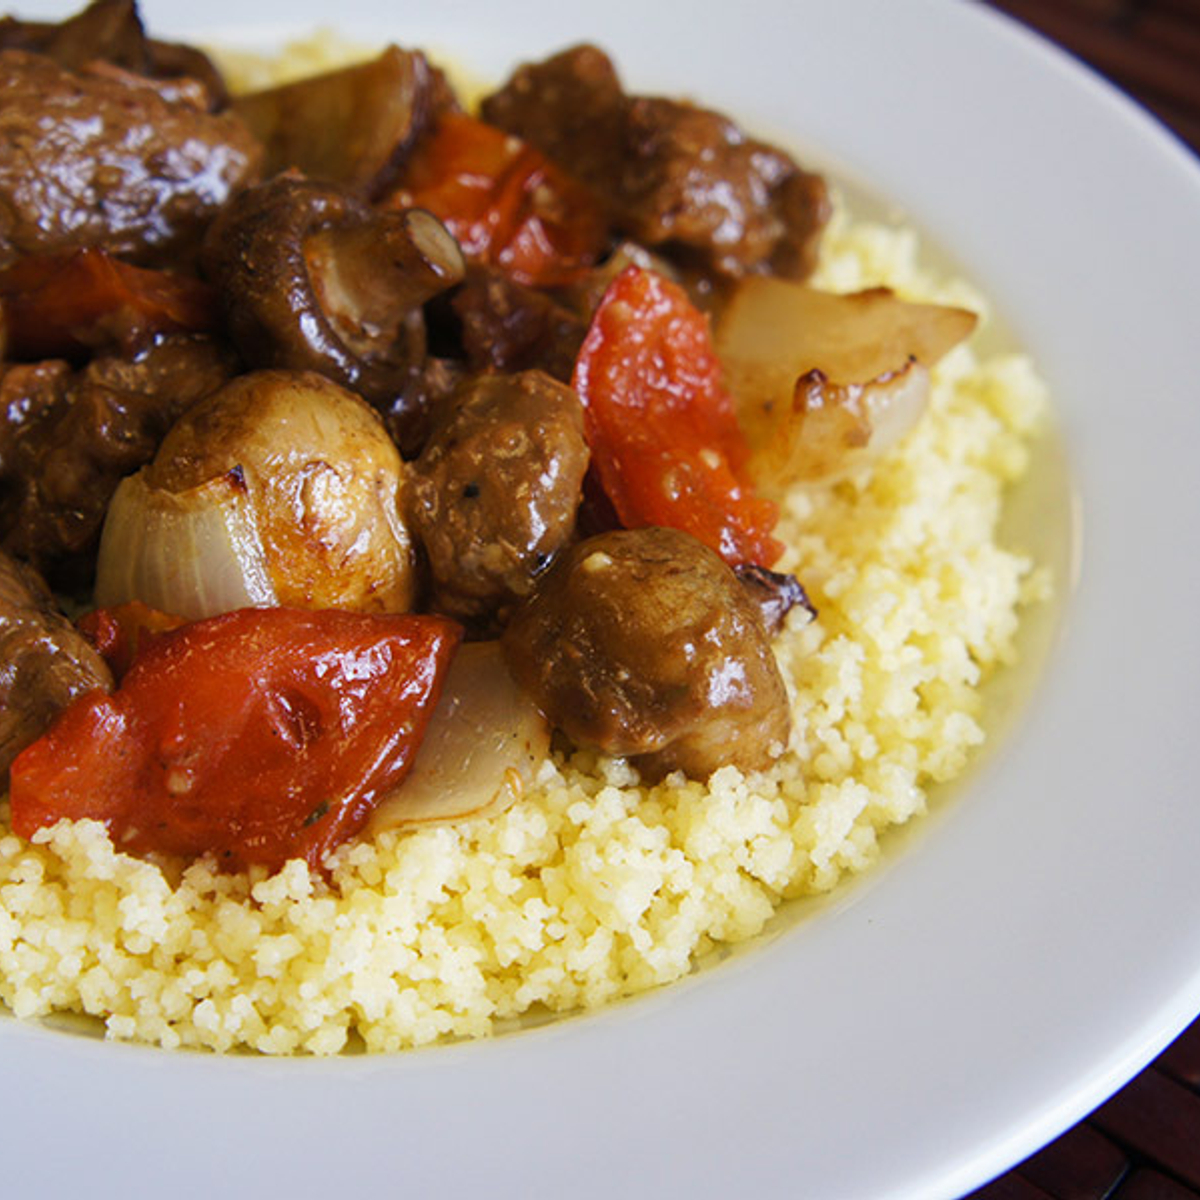 Savory Beef Stew with Roasted Vegetables Recipe